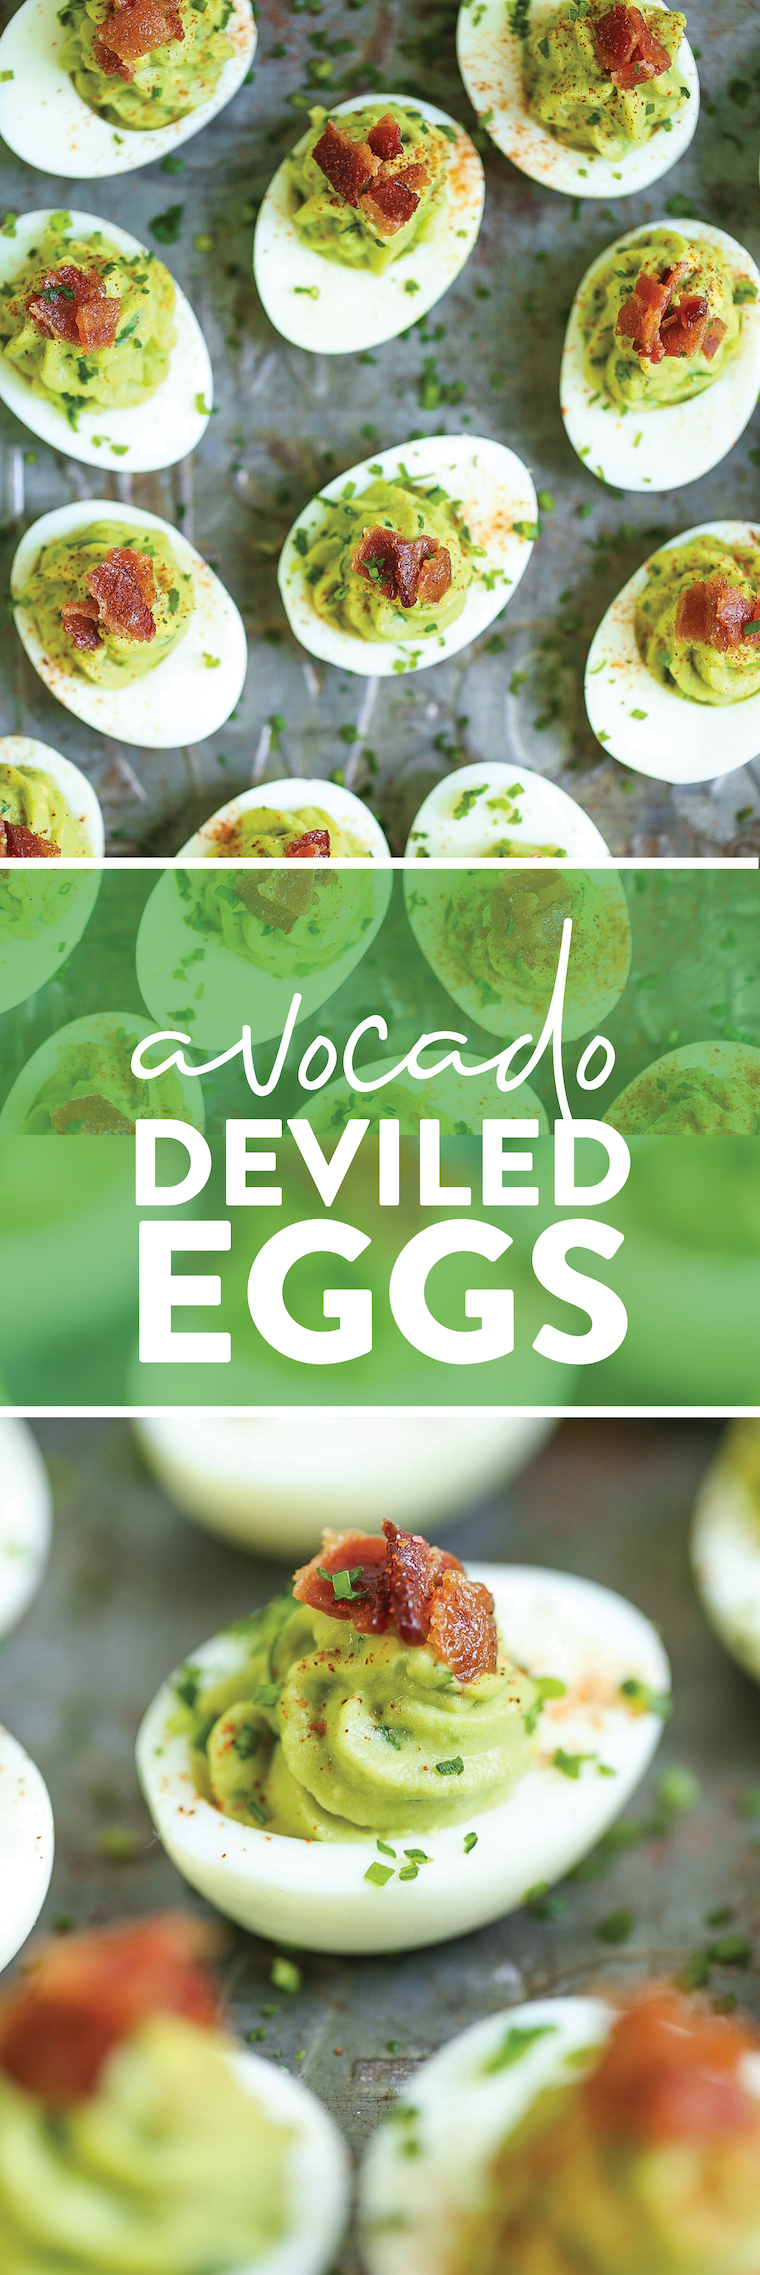 Avocado Deviled Eggs - So much better than your traditional-style deviled eggs! Loaded with avocado and crisp bacon bits. Can be made up to 3 hours ahead!